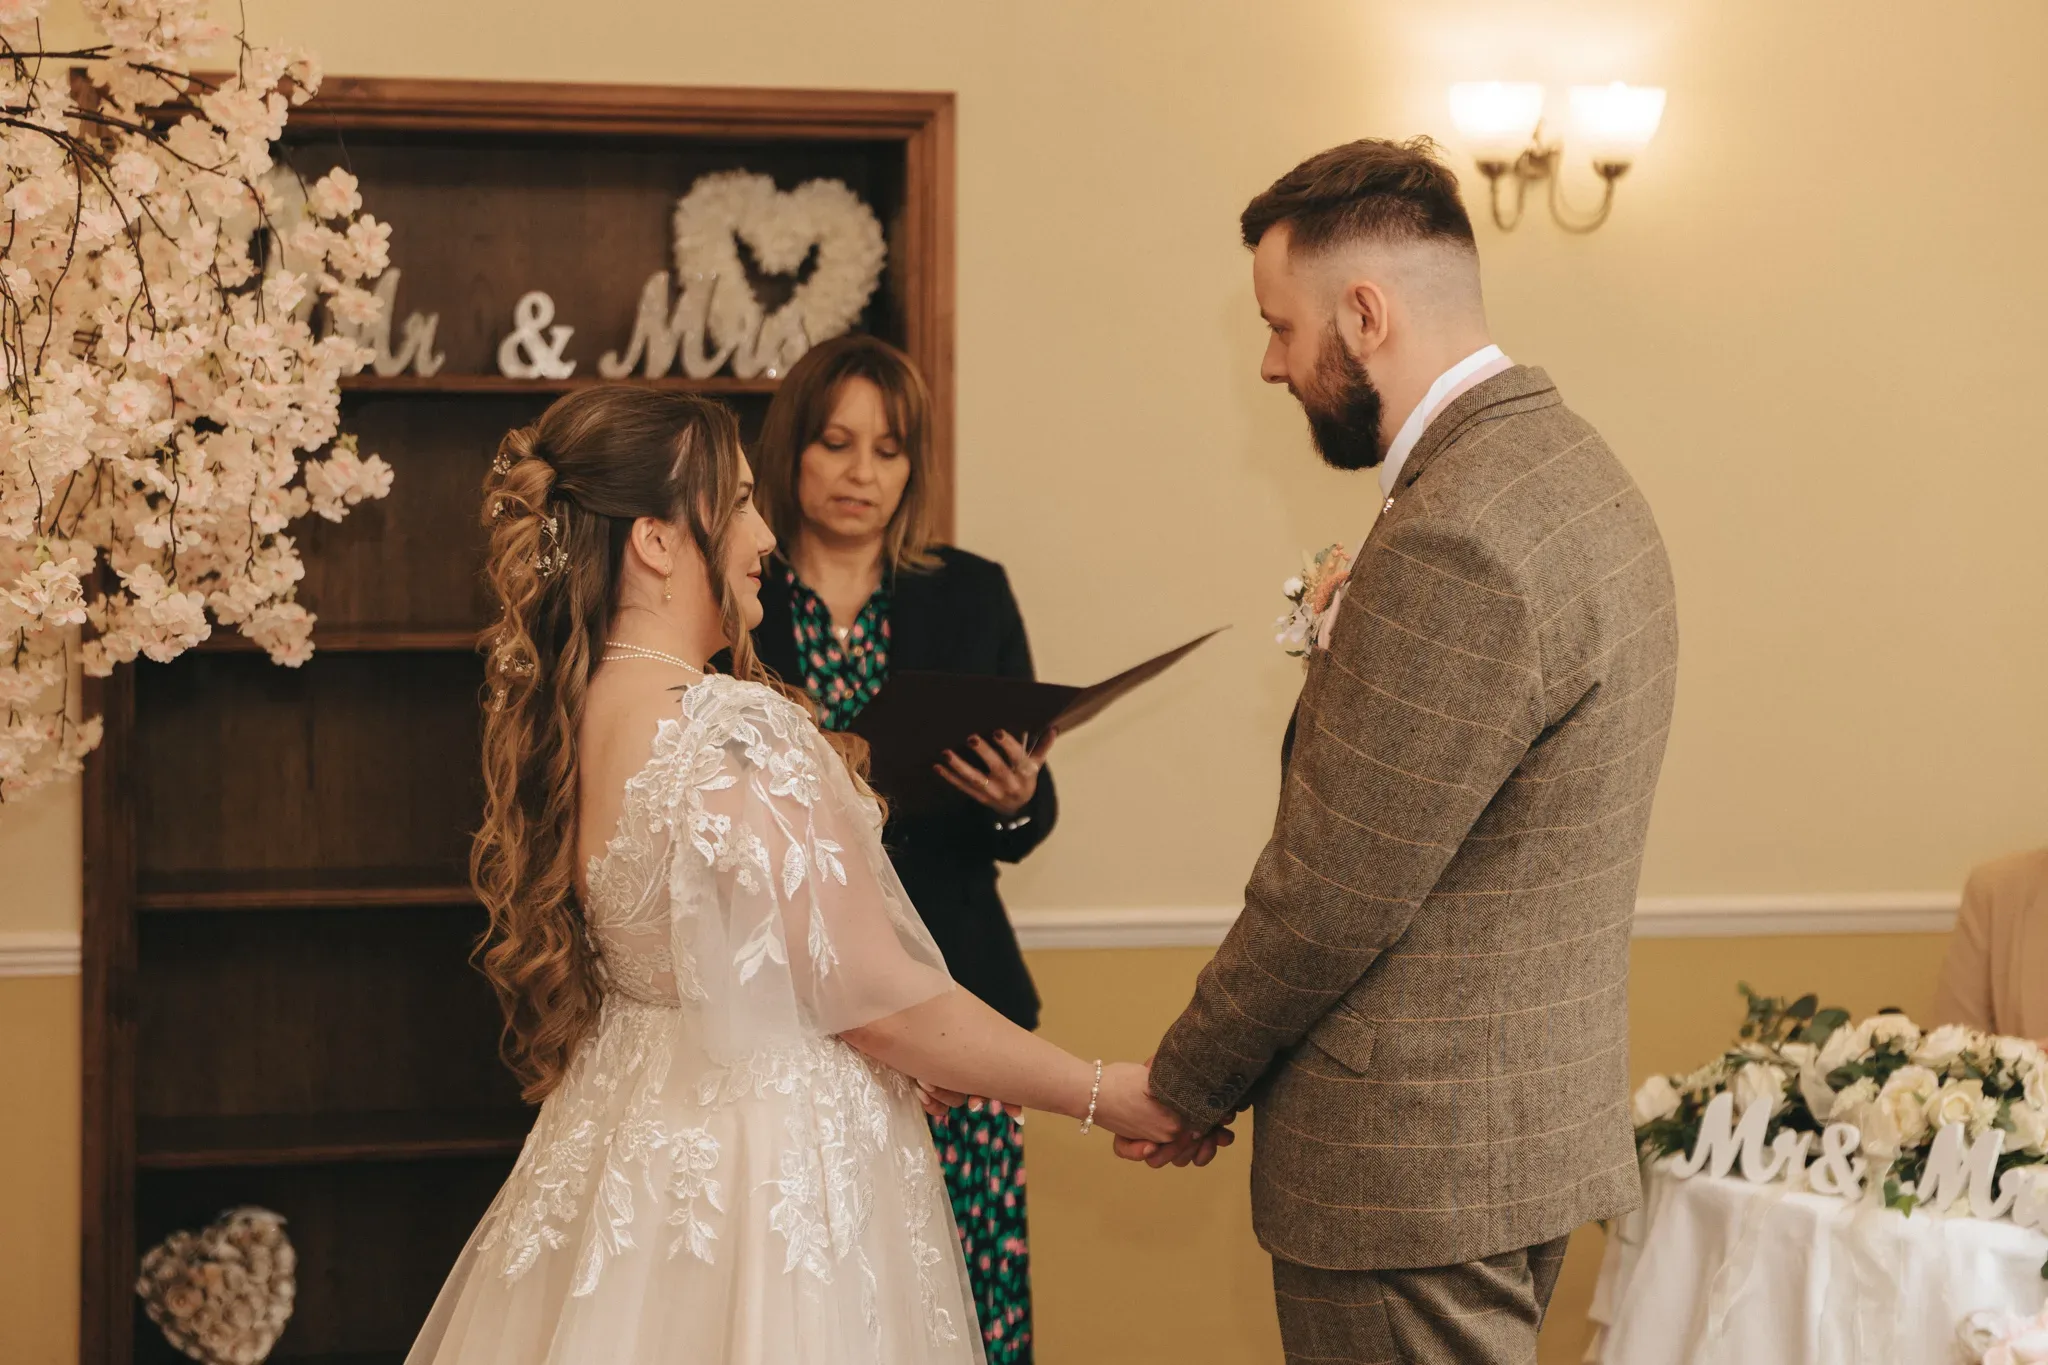 A bride and groom hold hands during a wedding ceremony, officiated by a woman in the background. the bride wears a white dress with lace sleeves, and the groom is in a tweed suit. a floral arch and "mr & mrs" sign decorate the room.